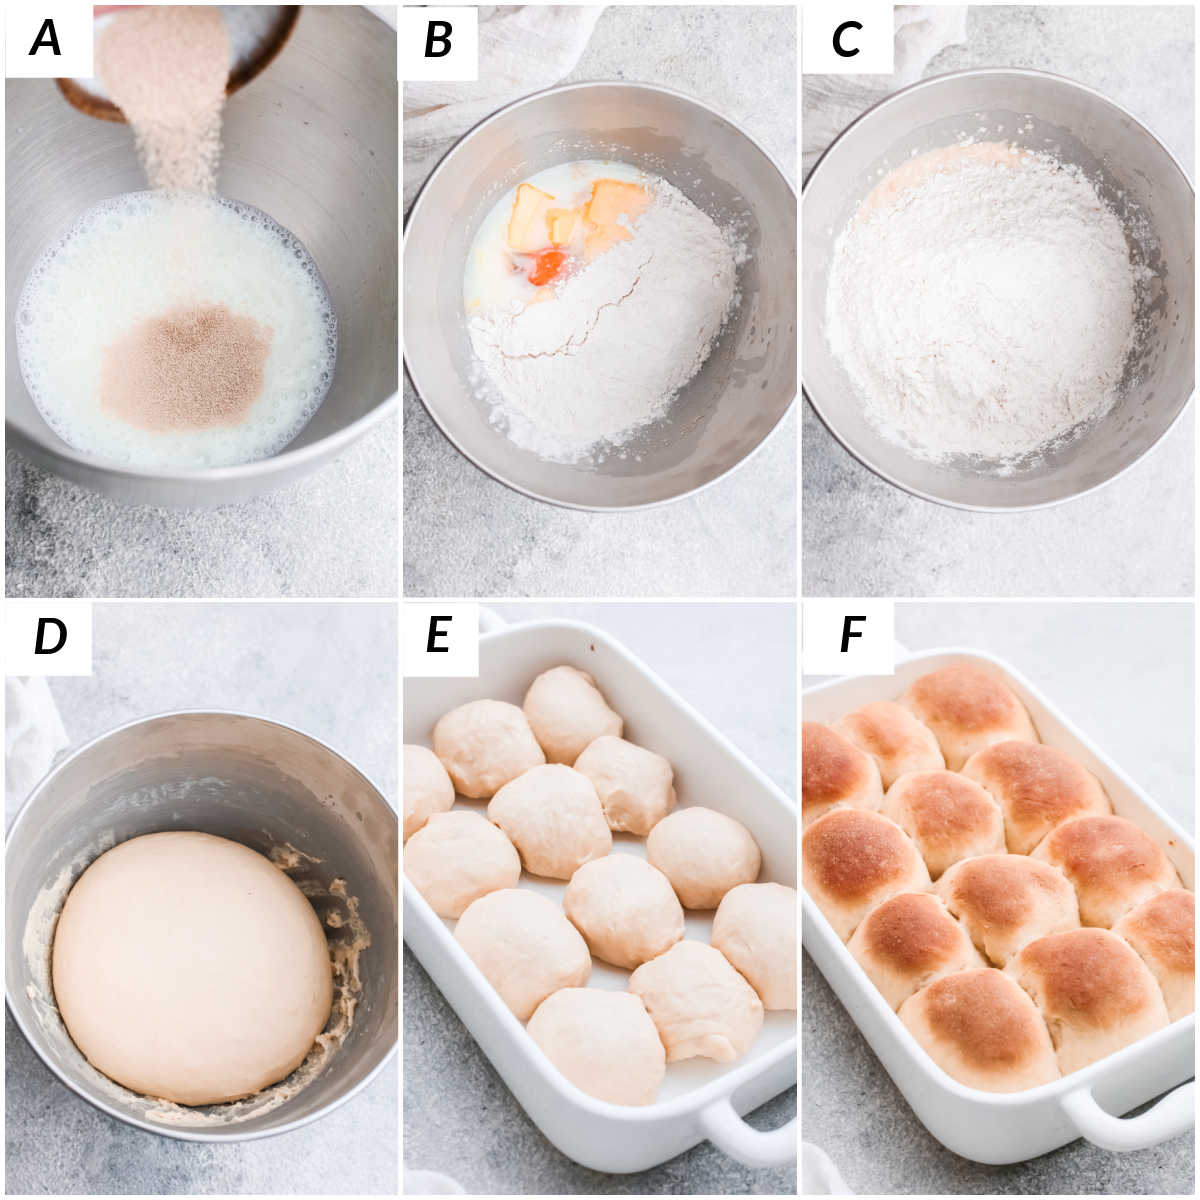 image collage showing the steps for making easy yeast rolls